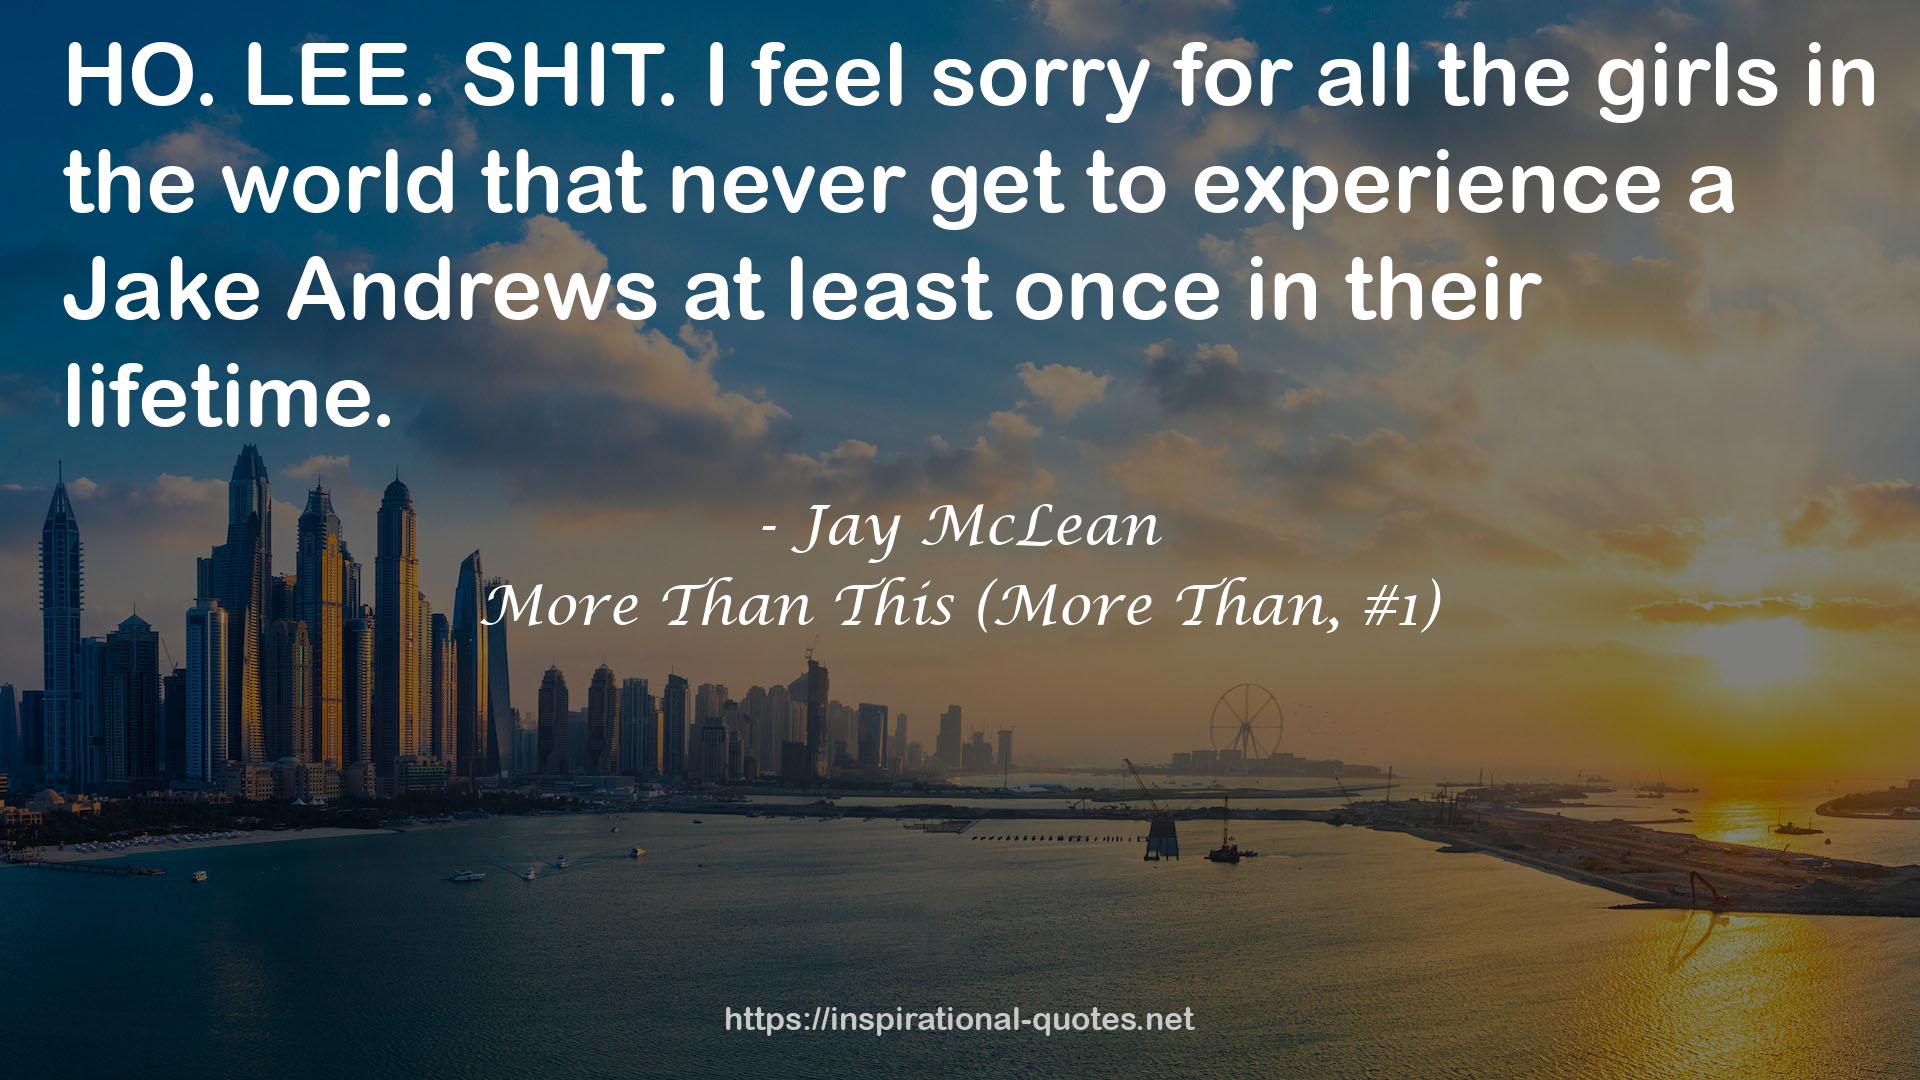 Jay McLean QUOTES